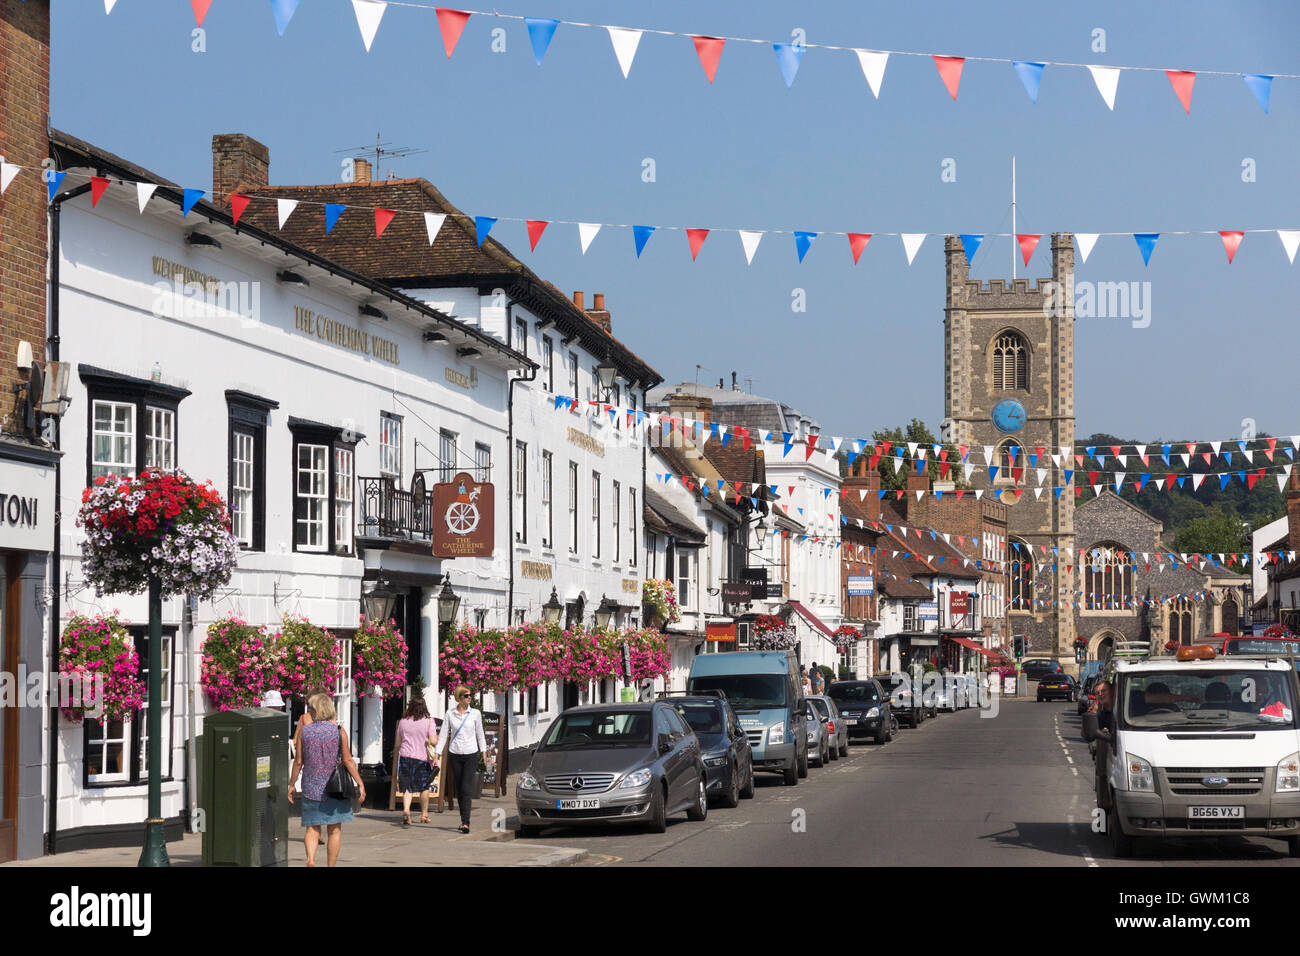 The parish church of St Mary the Virgin and the Catherine Wheel pub in Henley-on-Thames Stock Photo